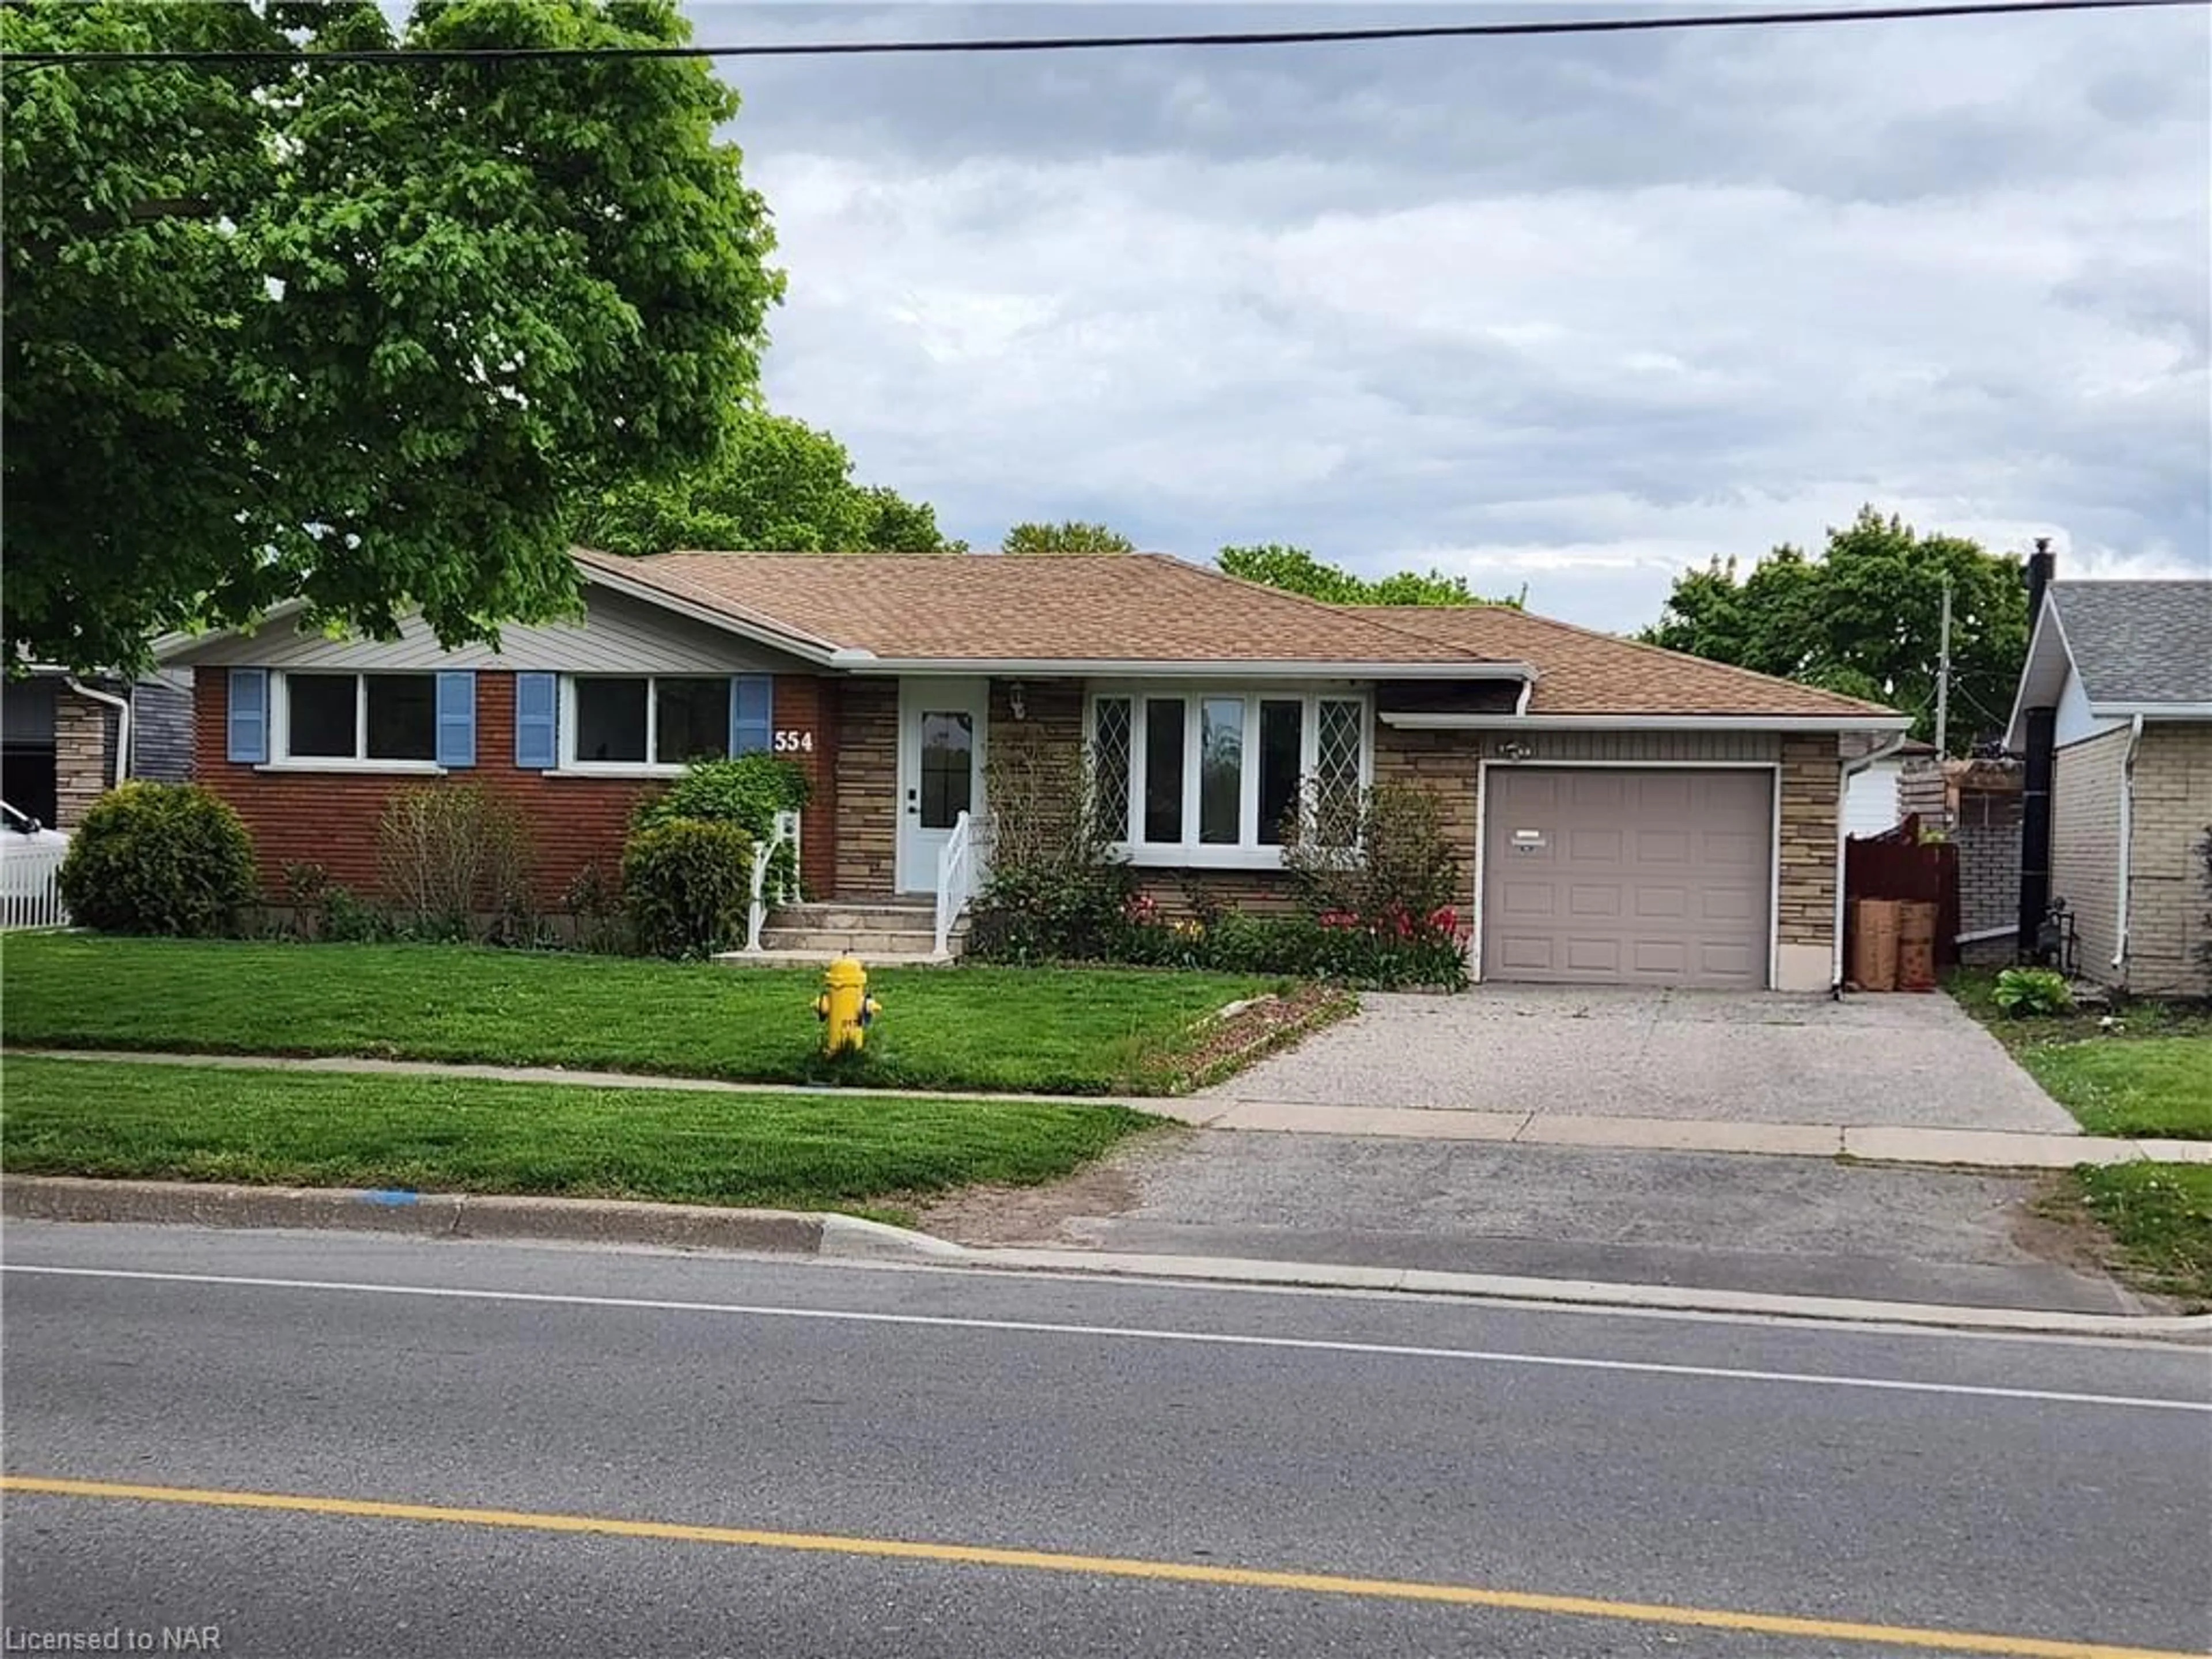 Frontside or backside of a home for 554 Lake St, St. Catharines Ontario L2N 4H9